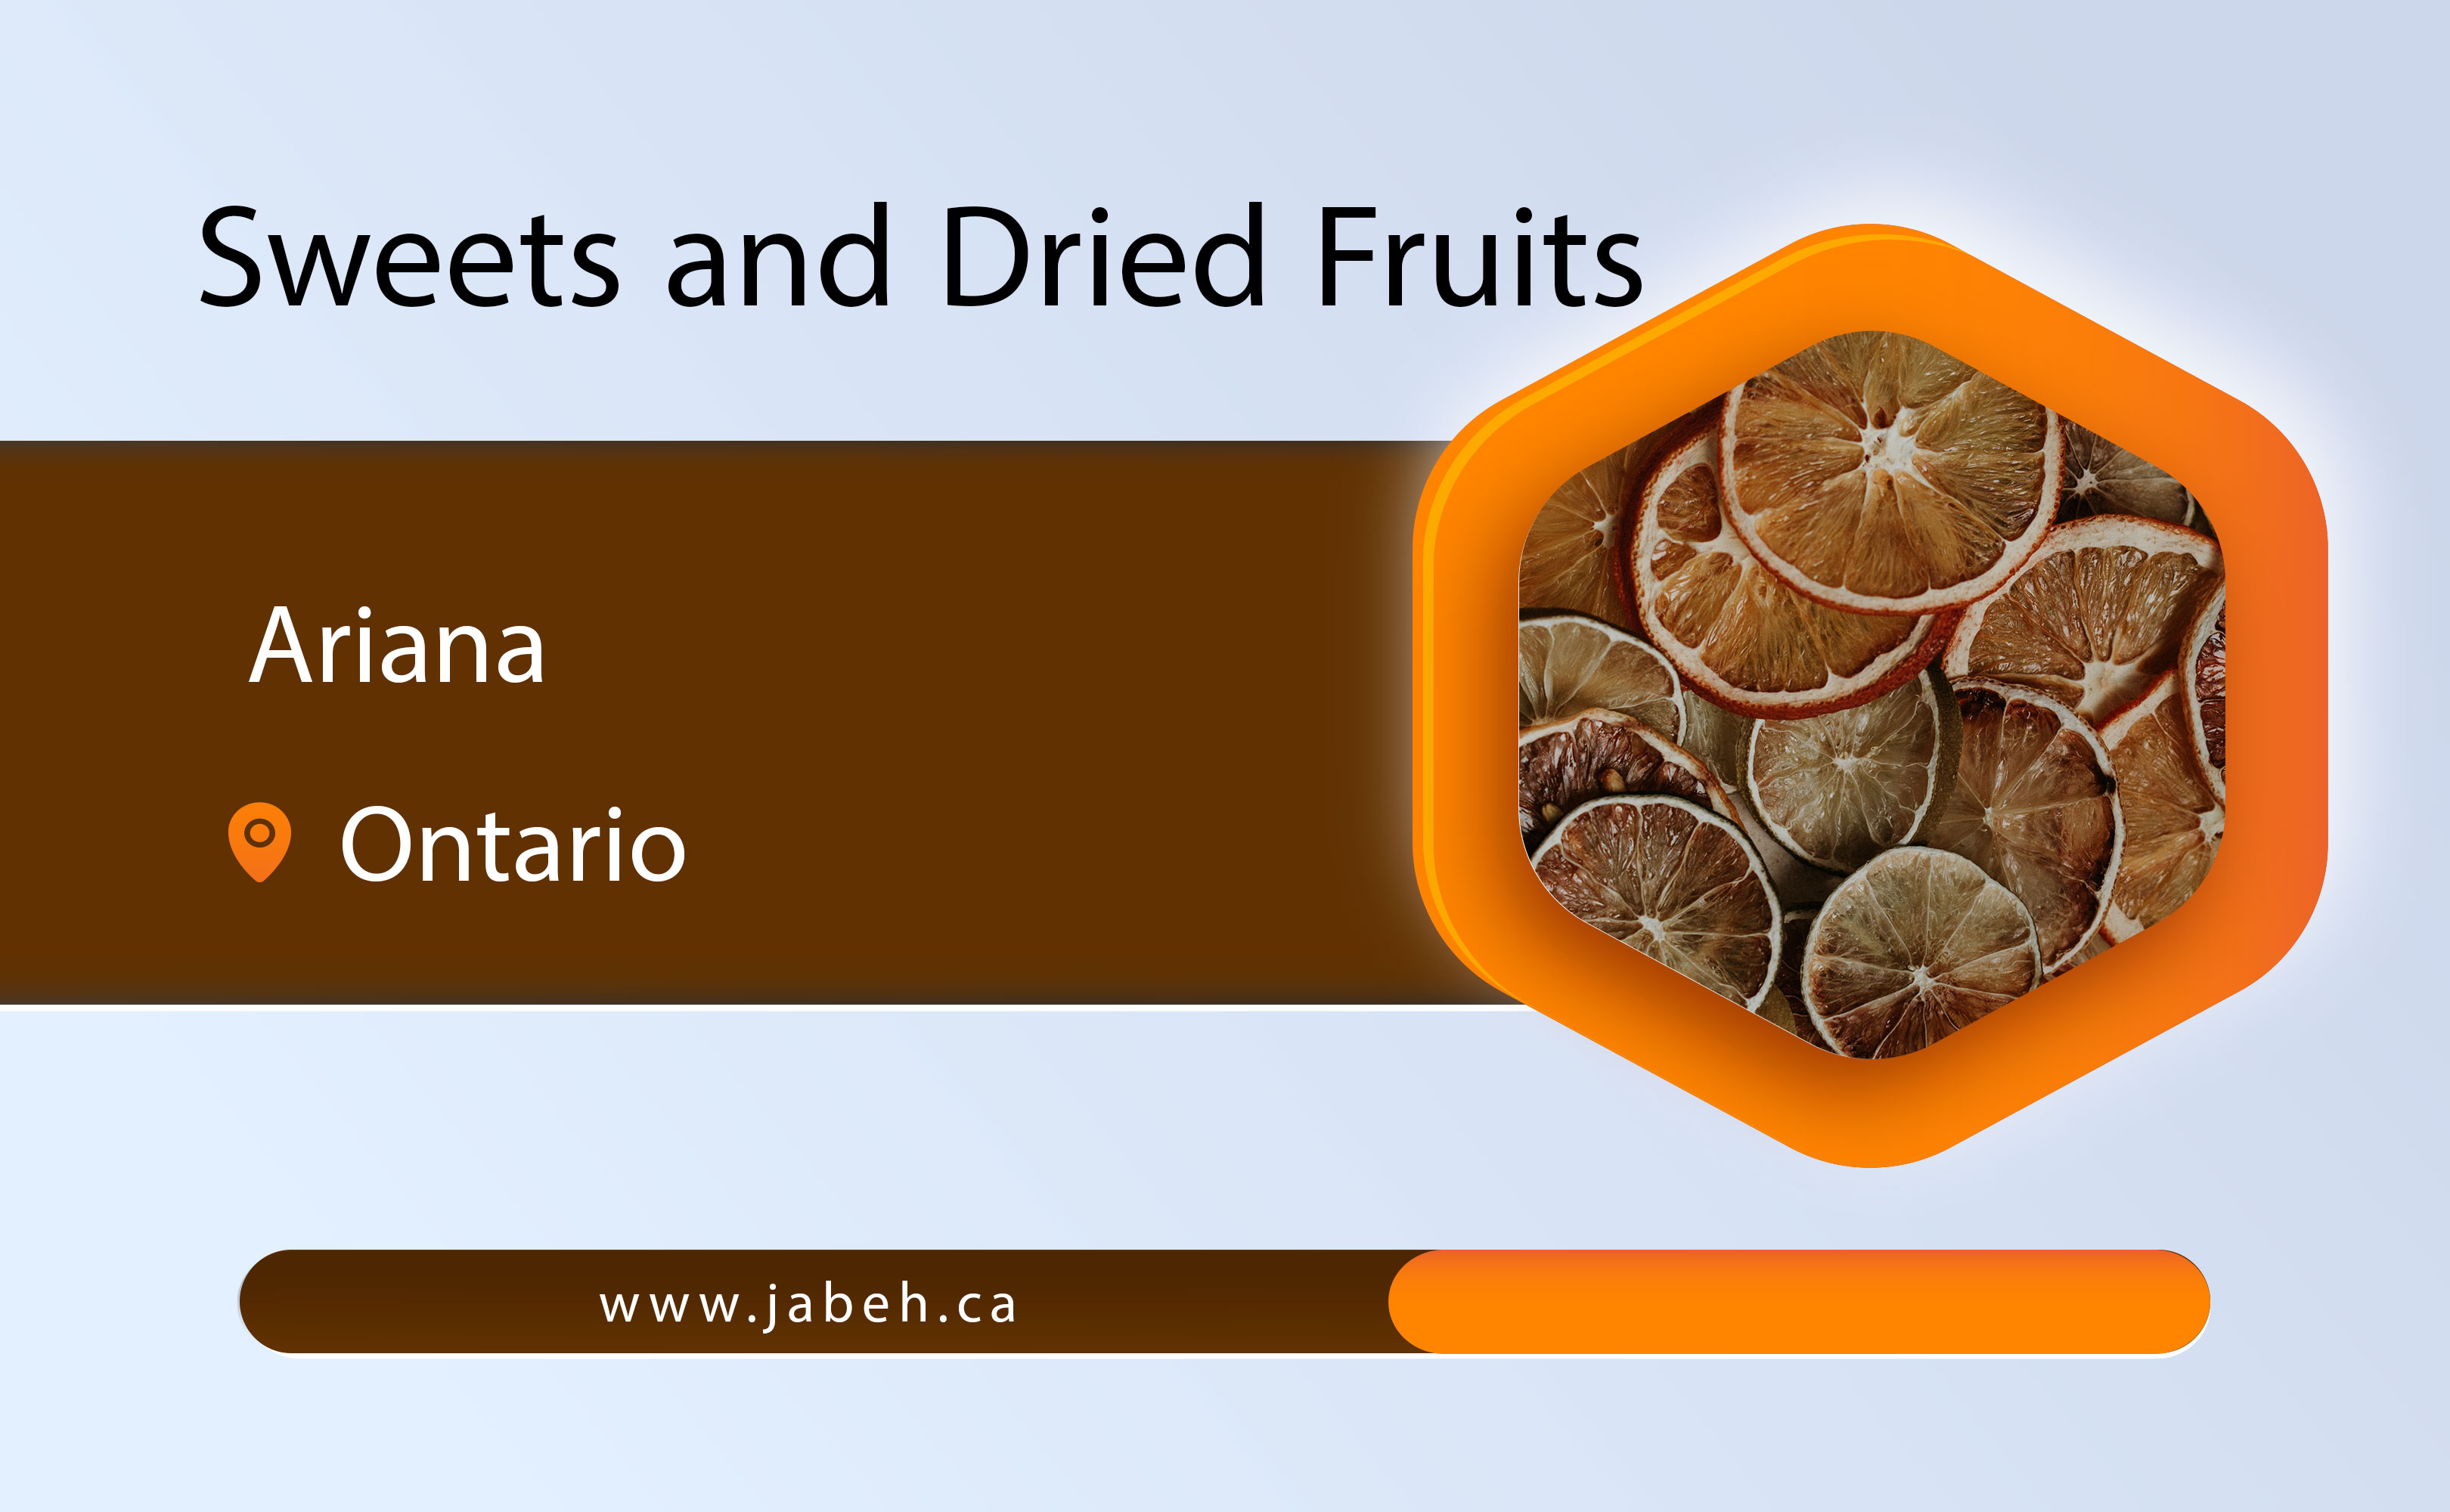 Ariana's Sweets and Nuts in Ontario